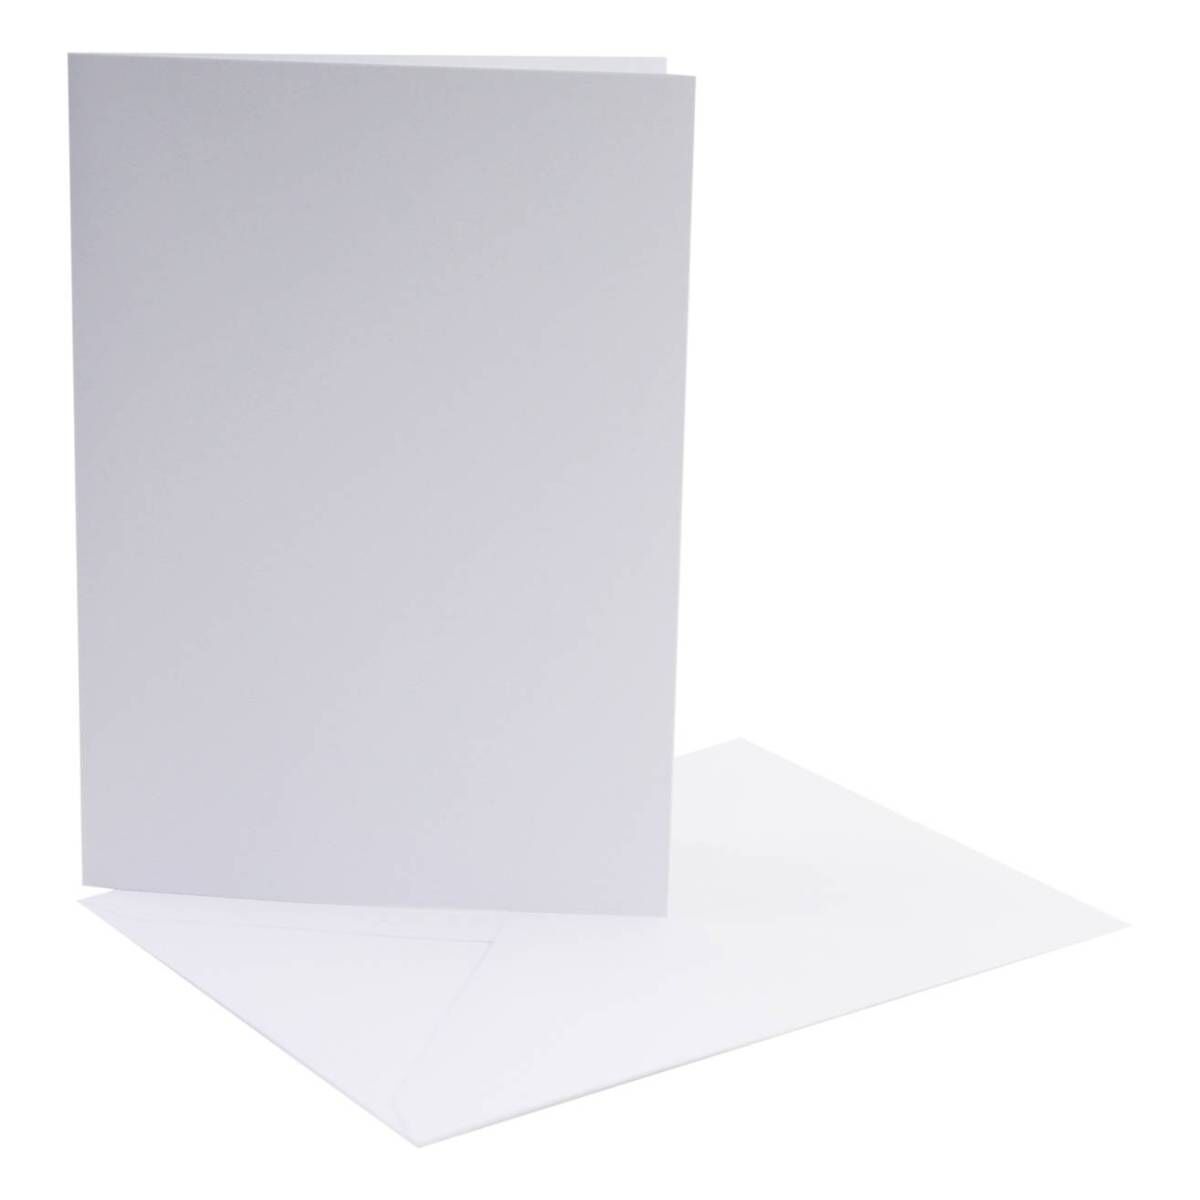 White Cards and Envelopes 5 x 7 Inches 4 Pack | Hobbycraft